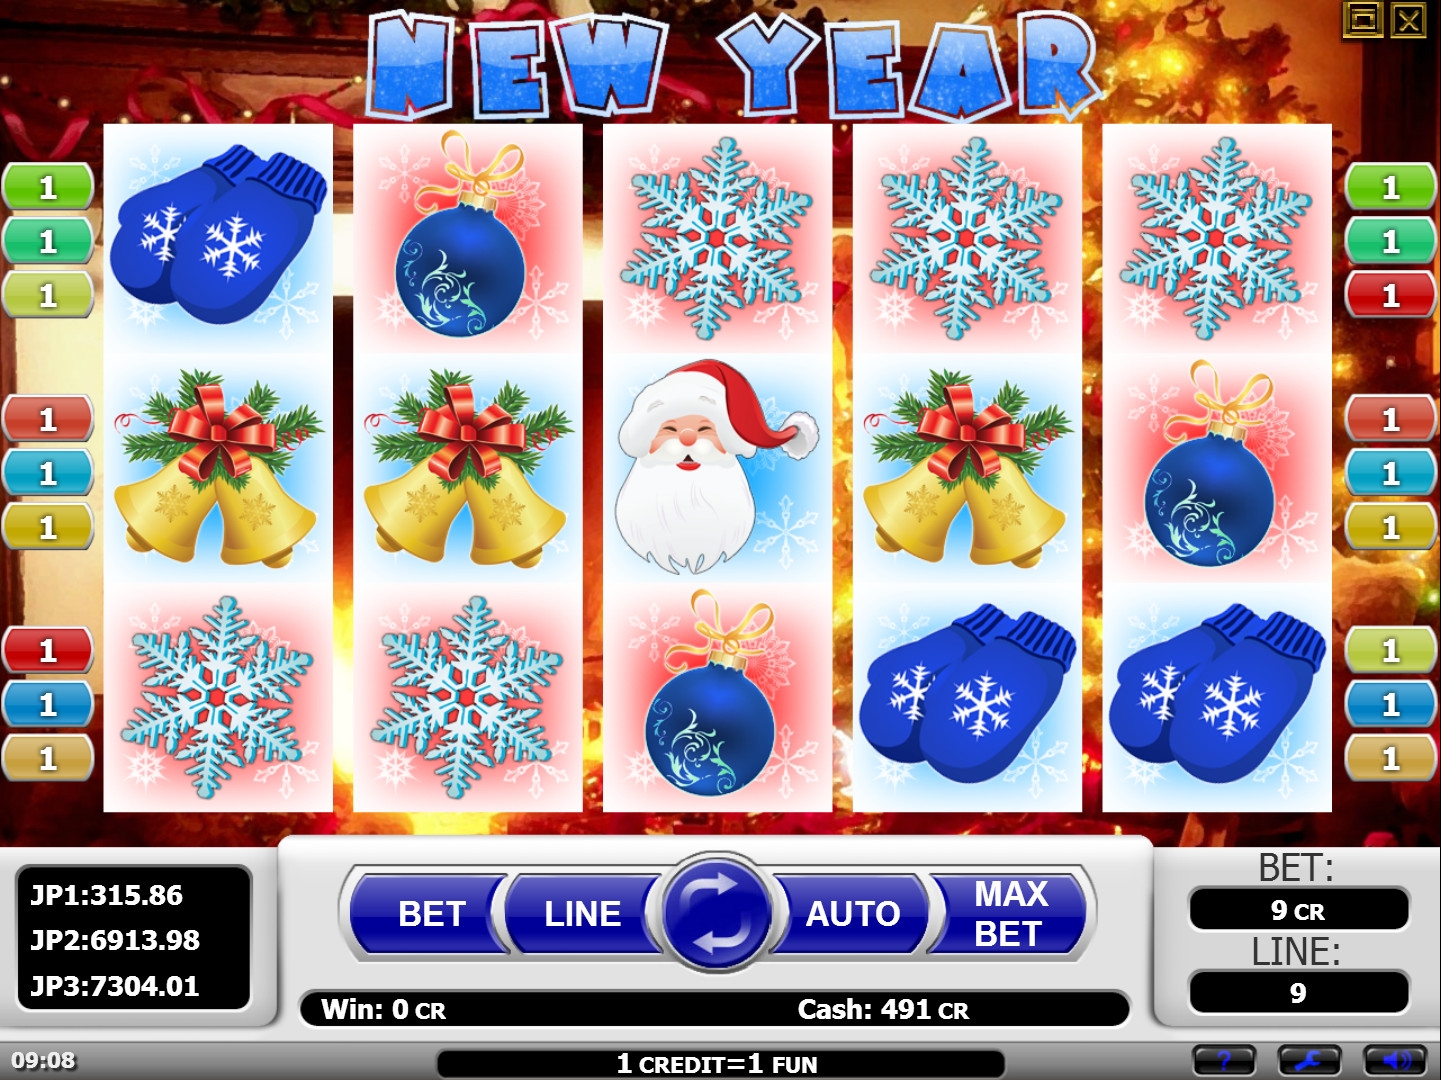 New Year (New Year) from category Slots